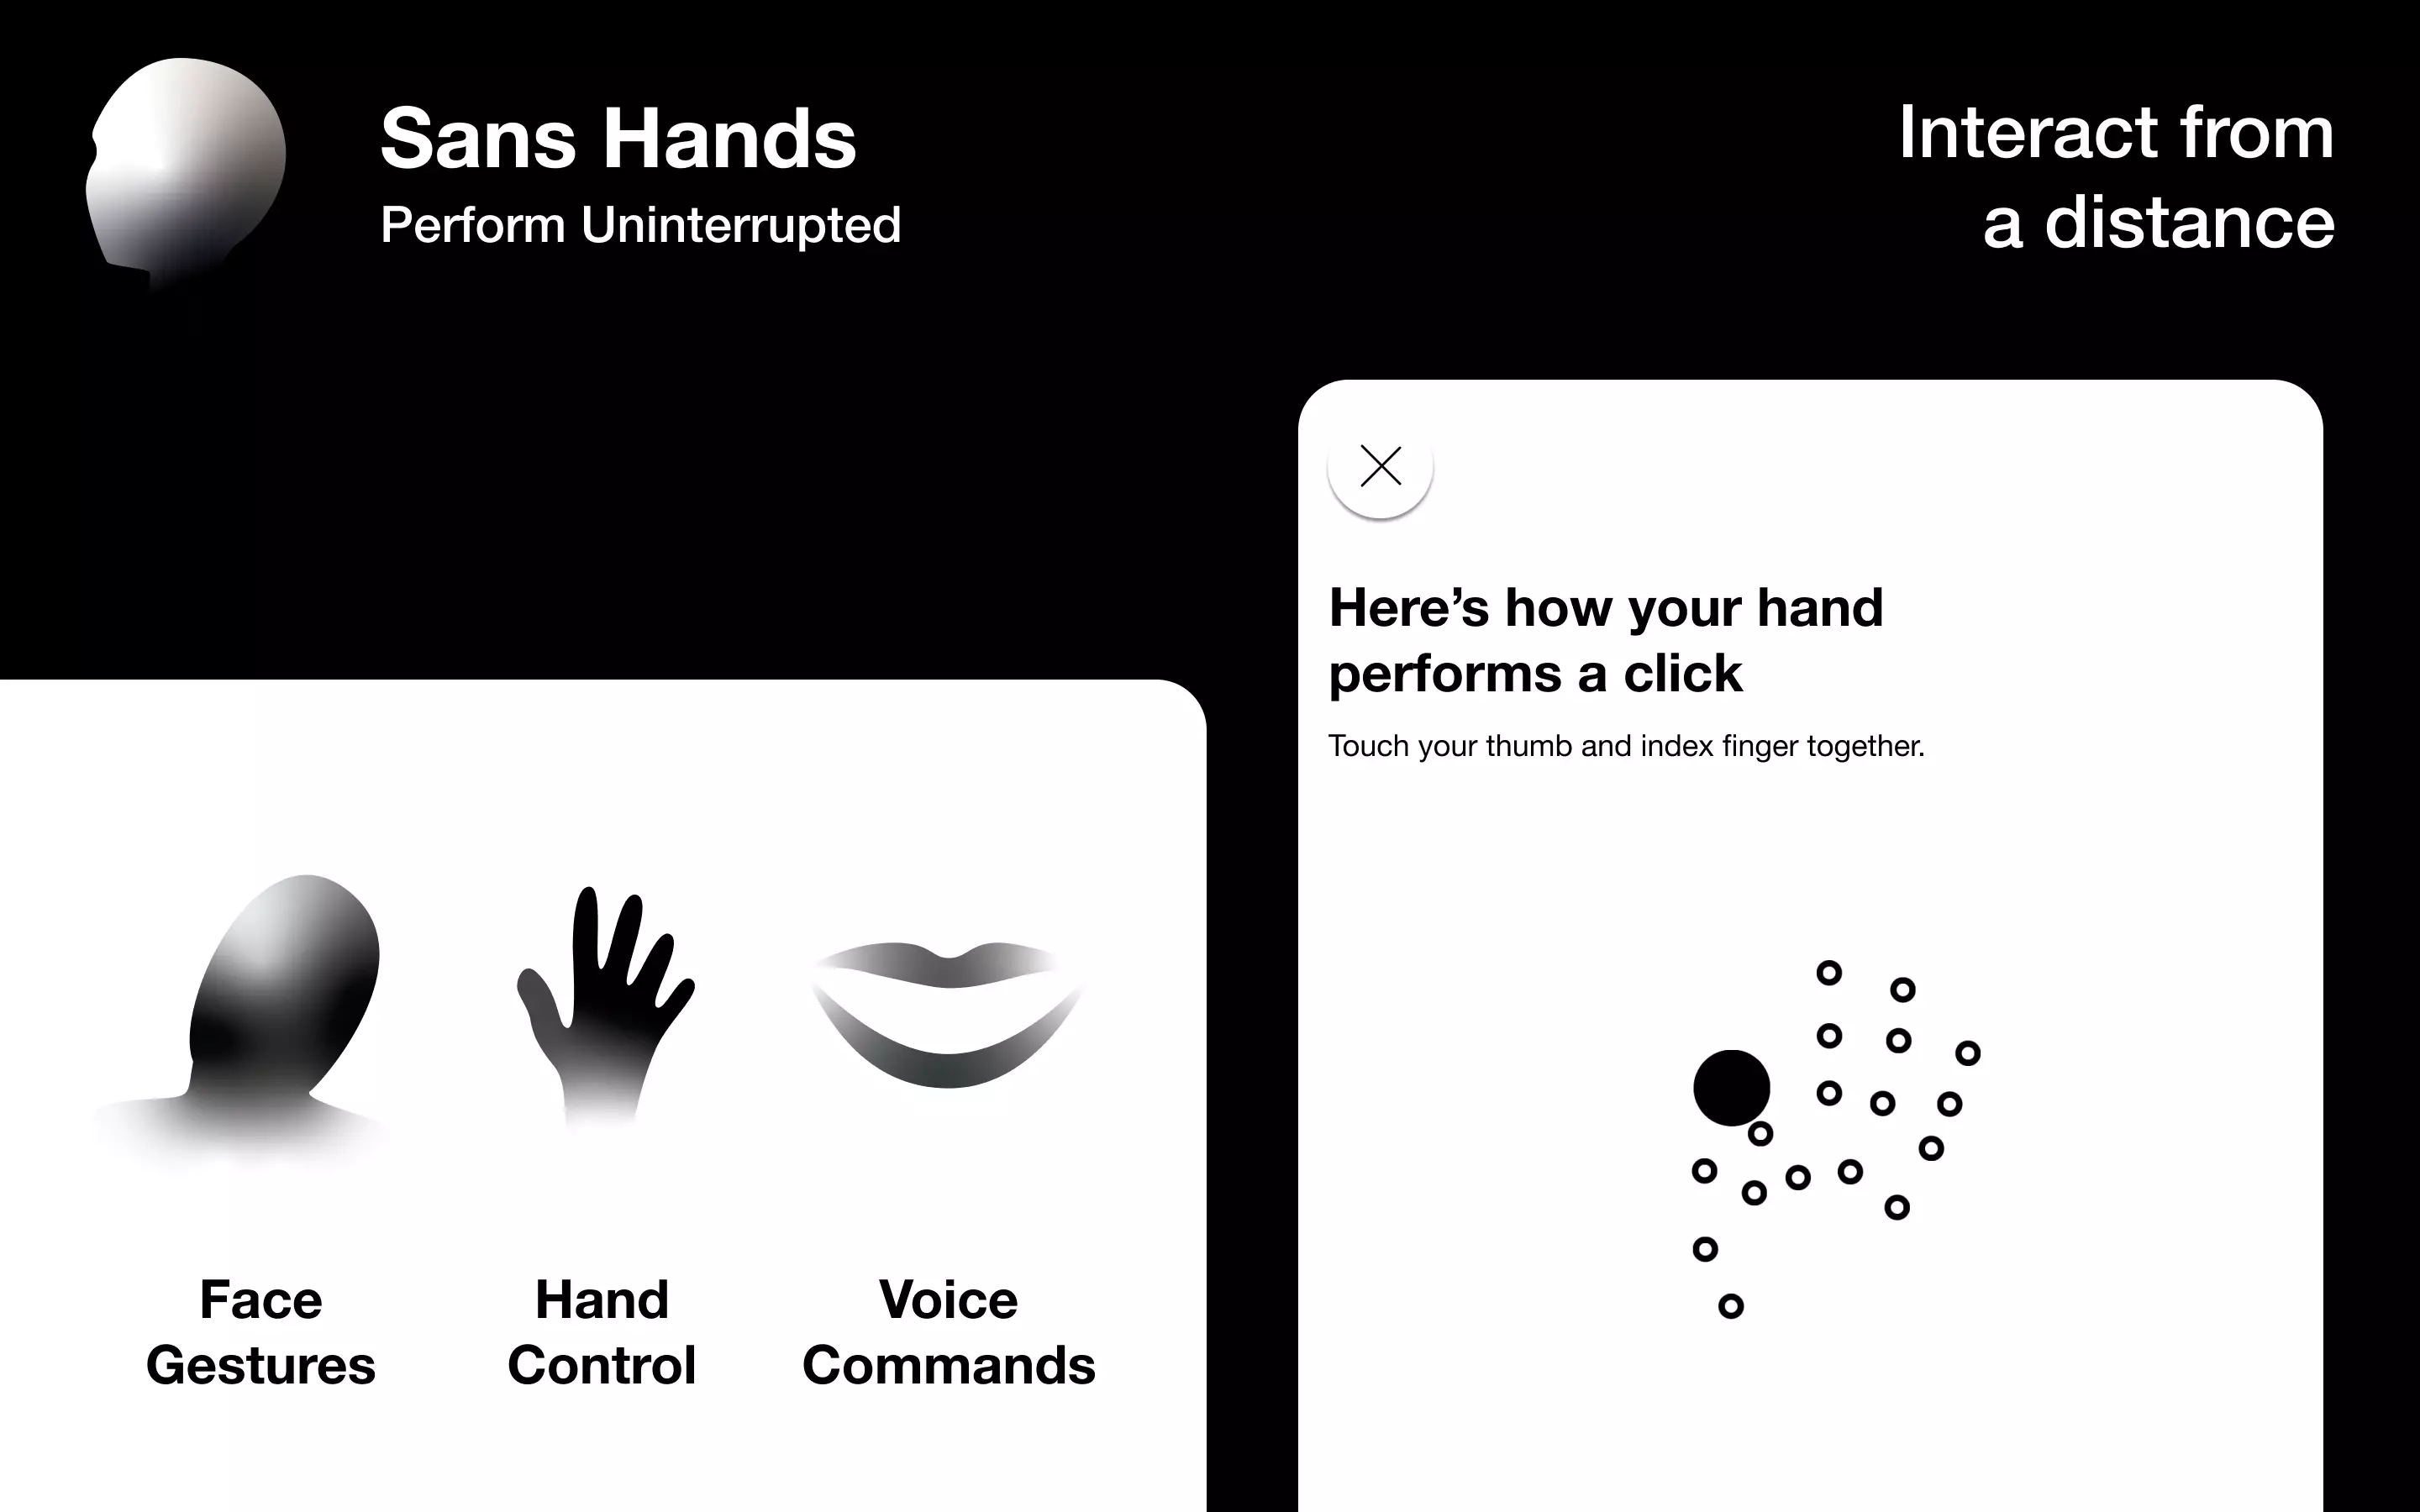 Sans Hands can be used with face gestures, hand control or voice commands.